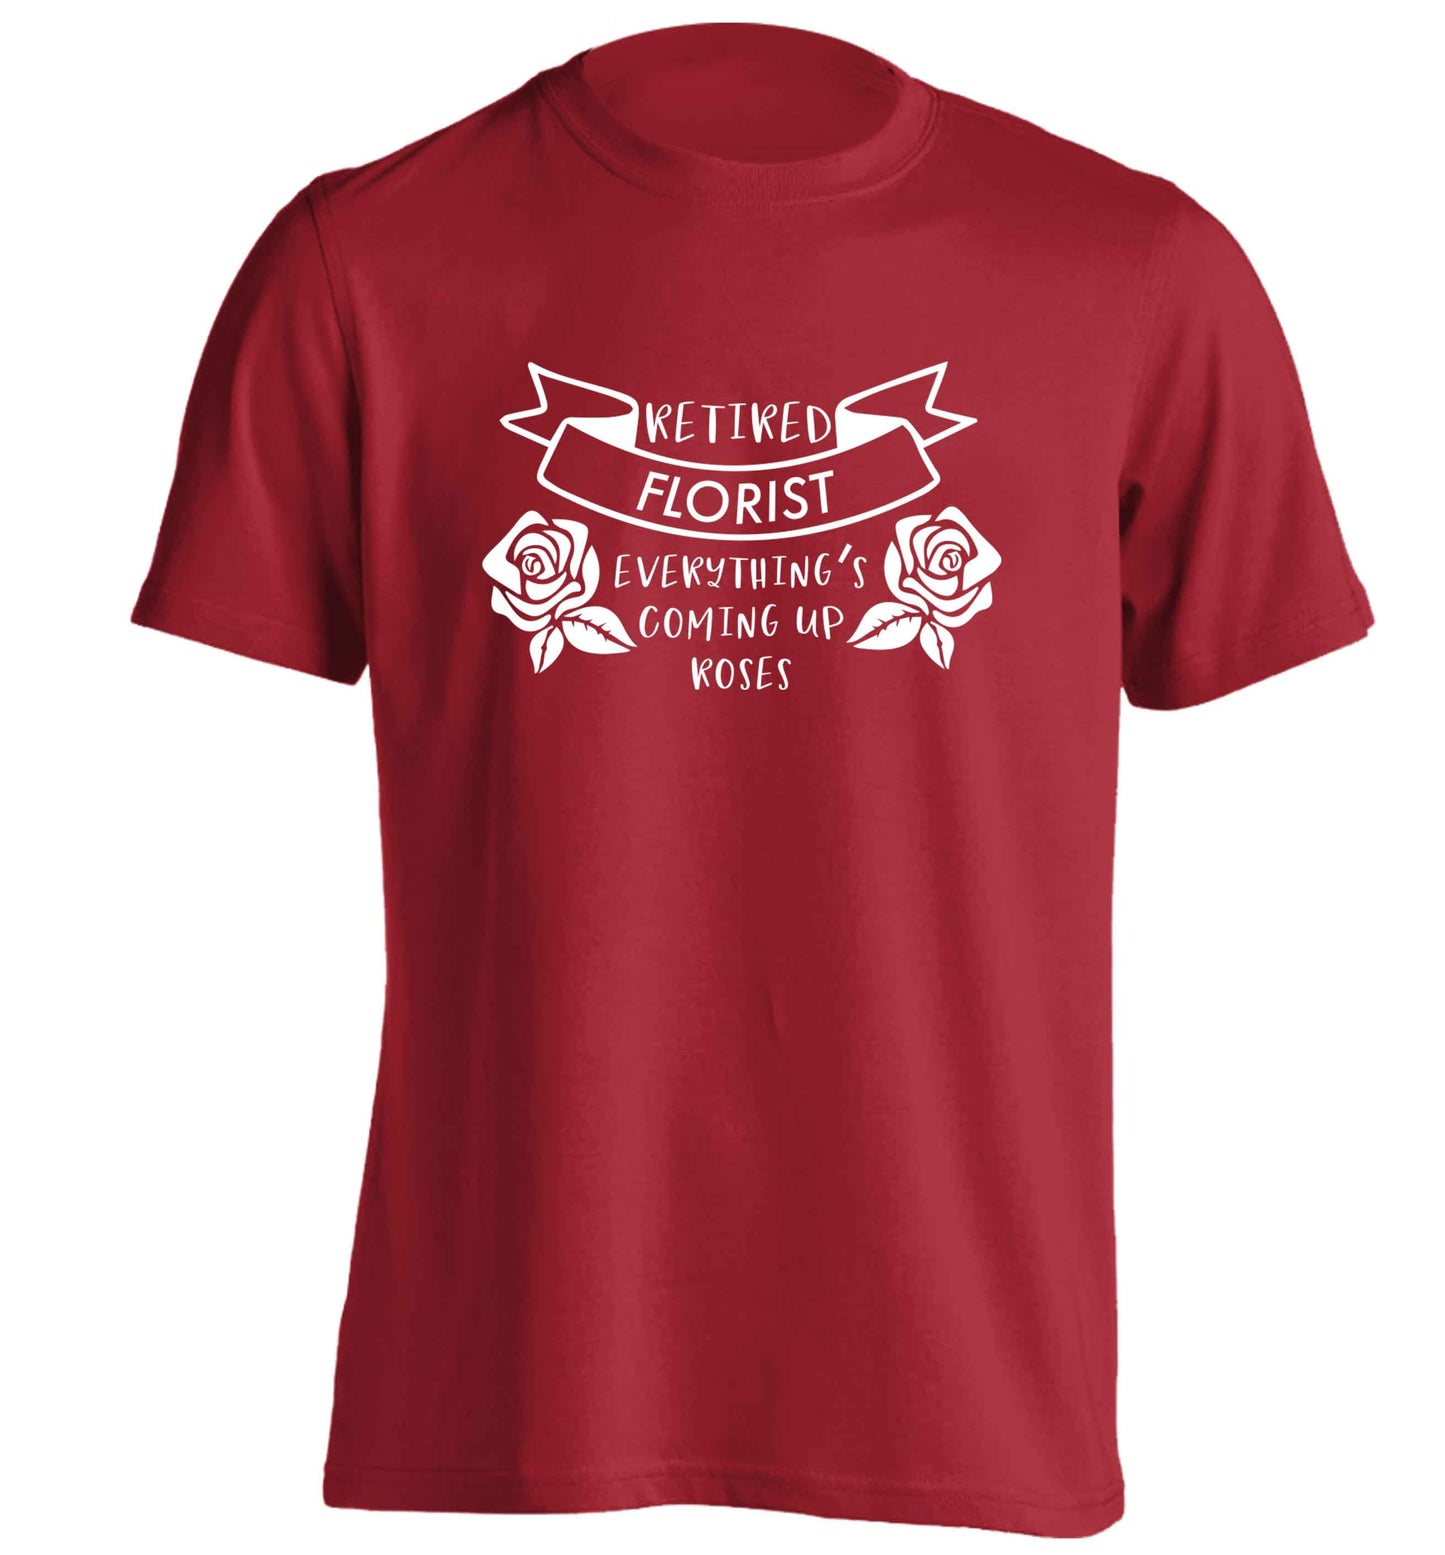 Retired florist everything's coming up roses adults unisex red Tshirt 2XL